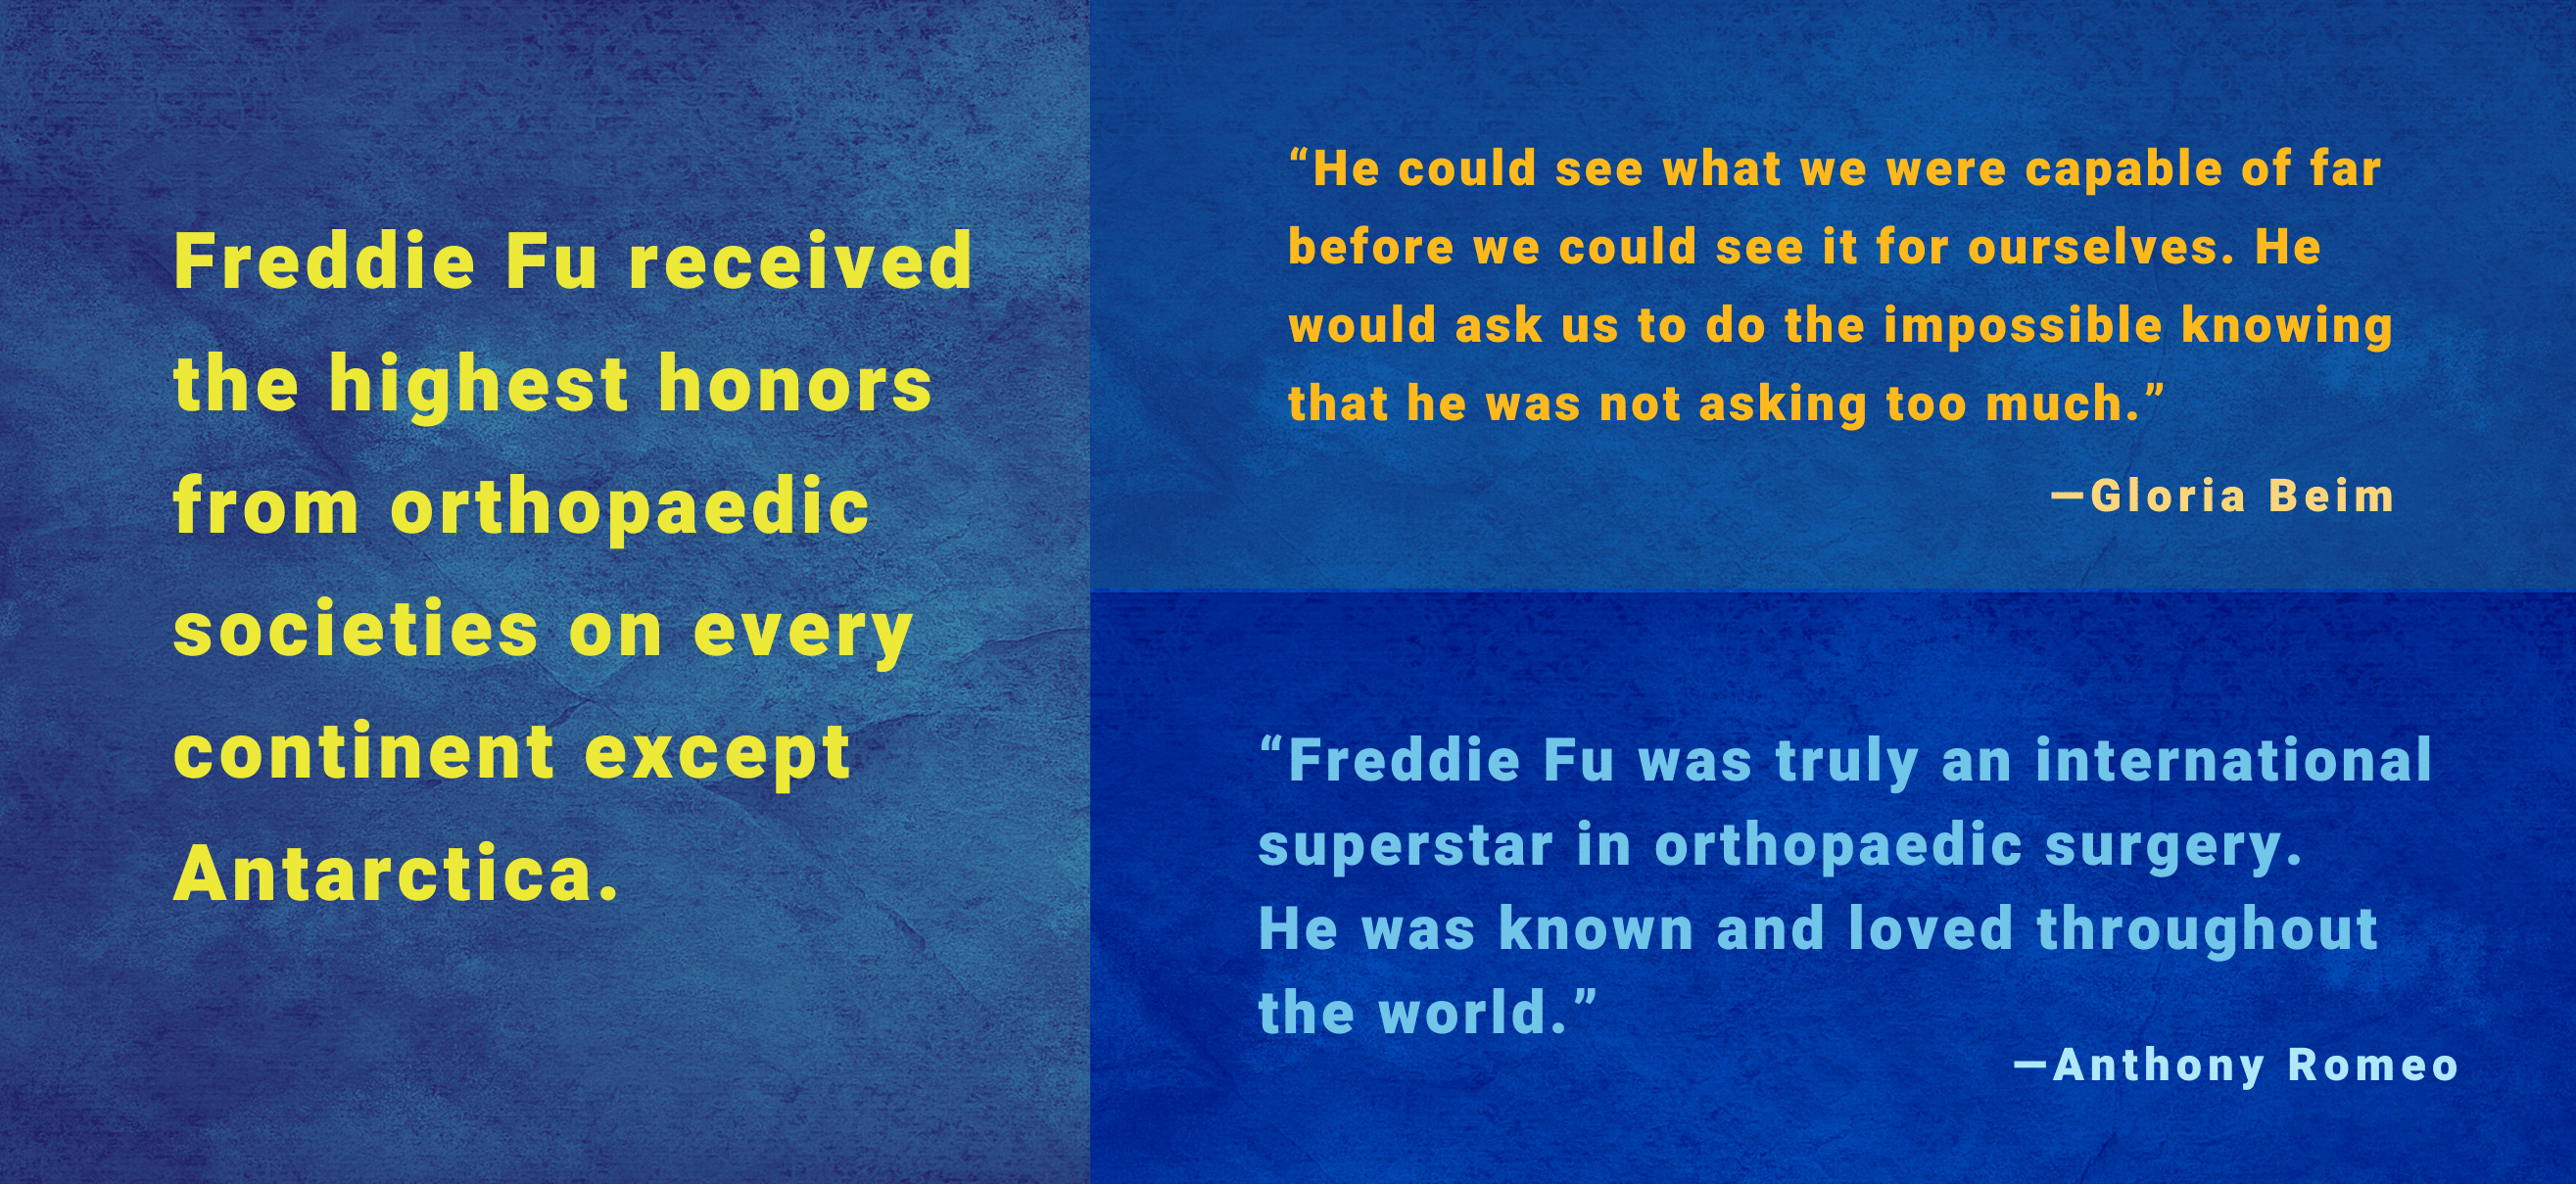 Freddie Fu received the highest honors from orthopaedic societies on every continent except Antarctica. /  “Freddie Fu was truly an international superstar in orthopaedic surgery. He was known and loved throughout the world.” —Anthony Romeo / “He cared like only family would. It is family who knows us best and can show us the mirror to help humble us in the most honest ways.” —Ronald Navarro